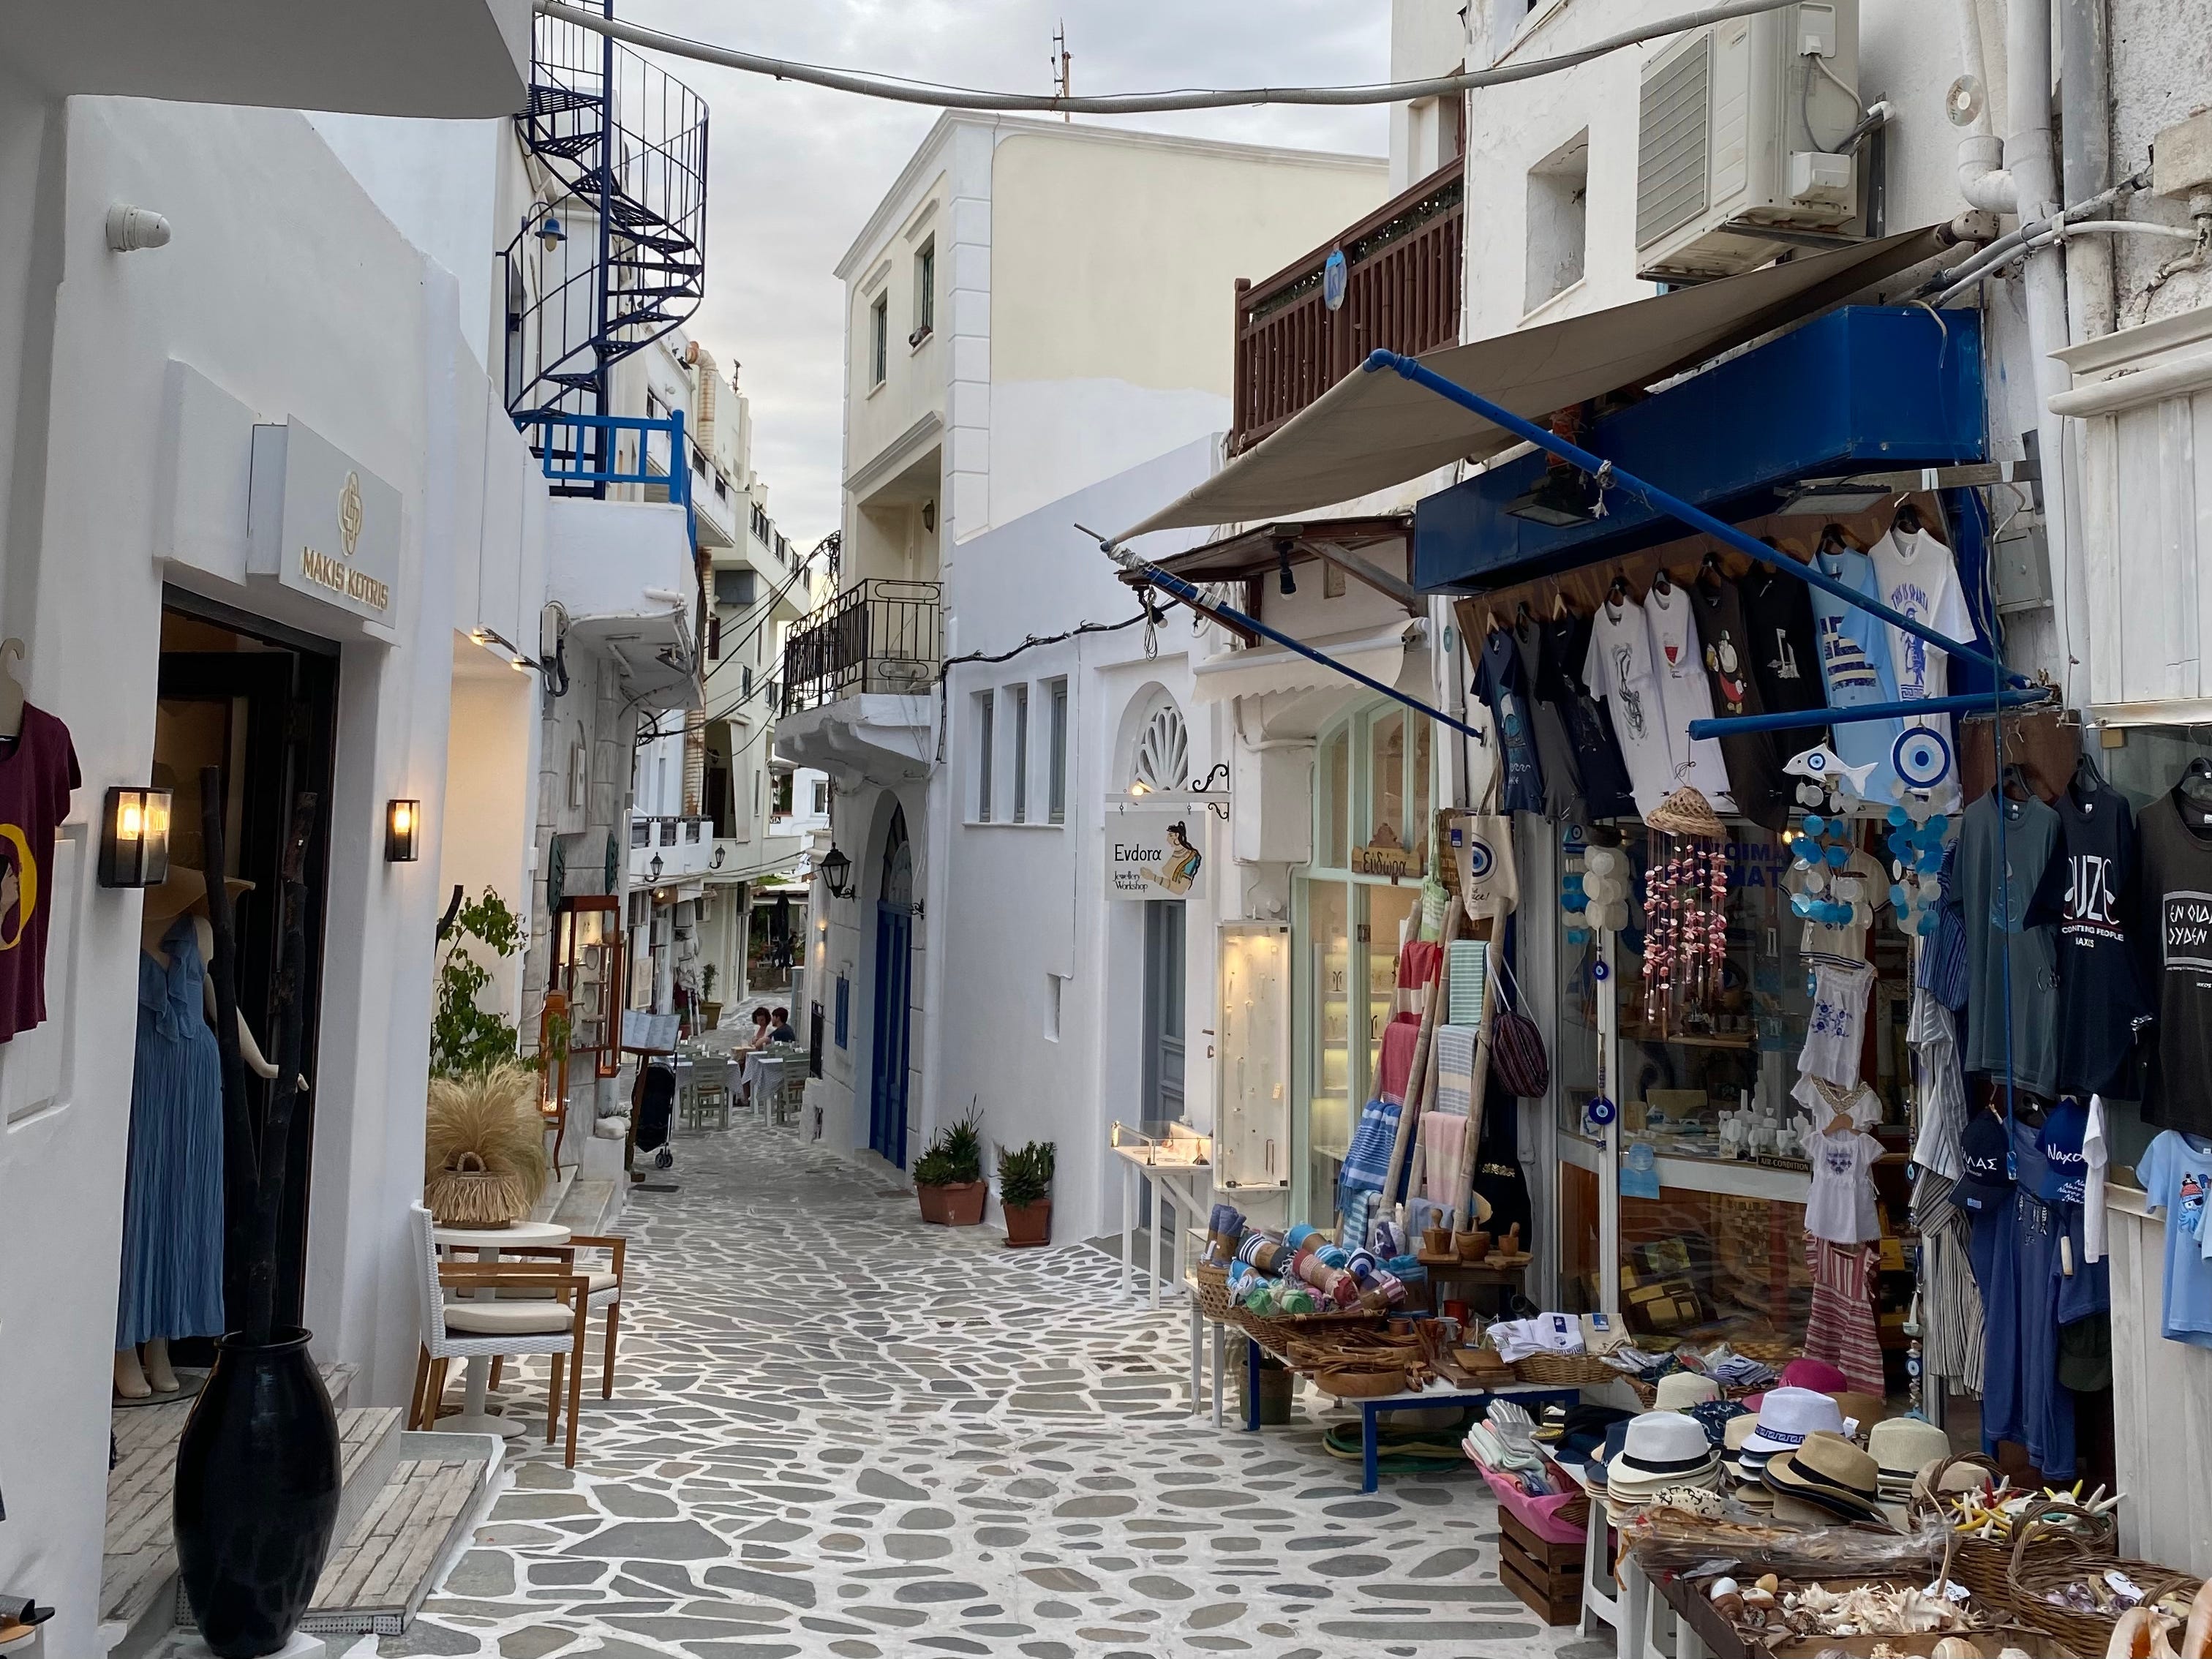 <p>We set aside a day to explore Naxos with no itinerary, and we got to take our time shopping in markets, sitting by the ocean, and discovering new food spots.</p><p>It was nice to be spontaneous and stumble upon hidden gems that day instead of stressing about making it to another activity on time.</p>